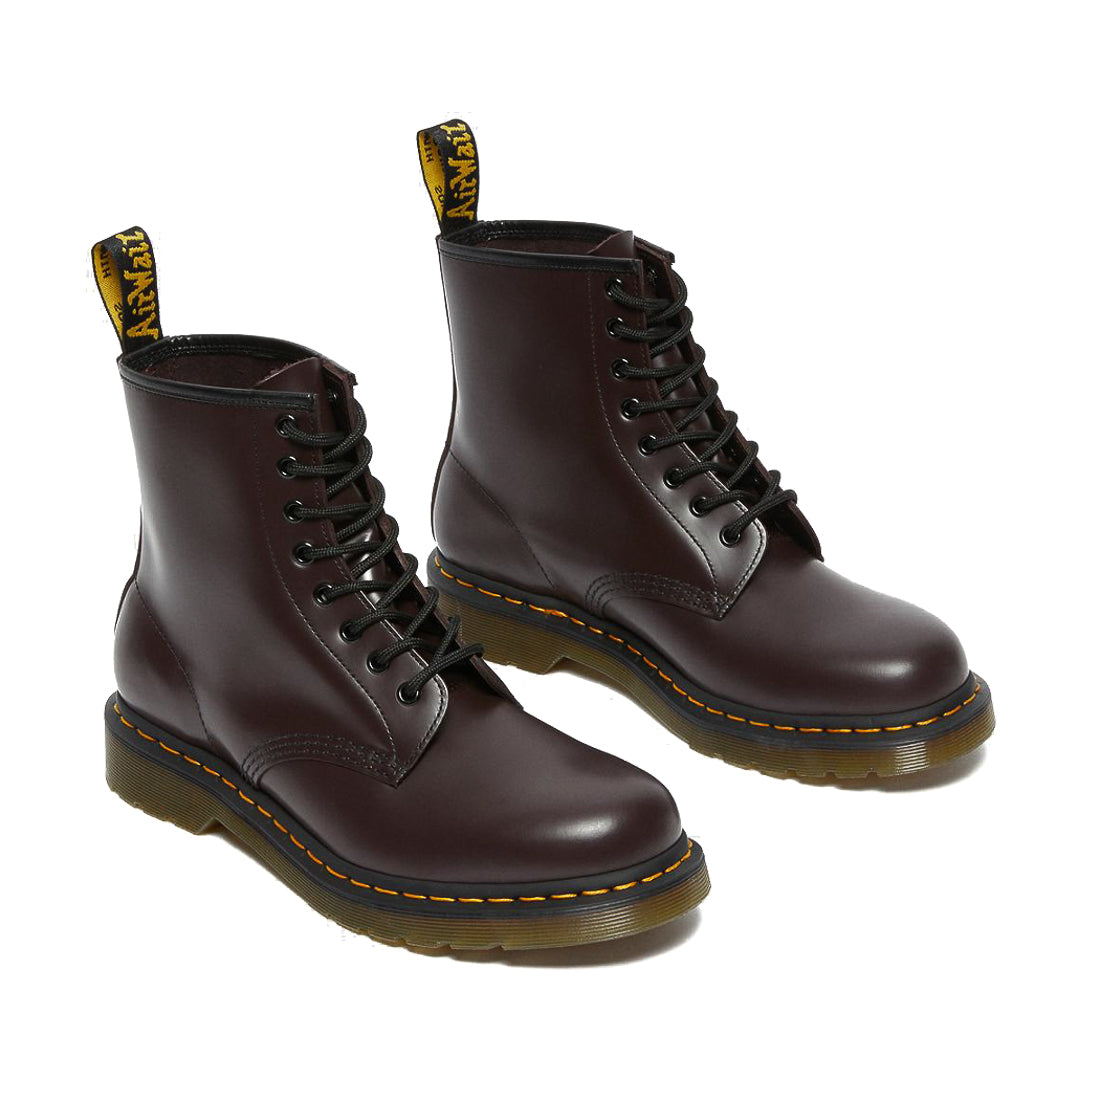 Dr. Marten 1460 Leather Lace Up Boots 'Burgundy'